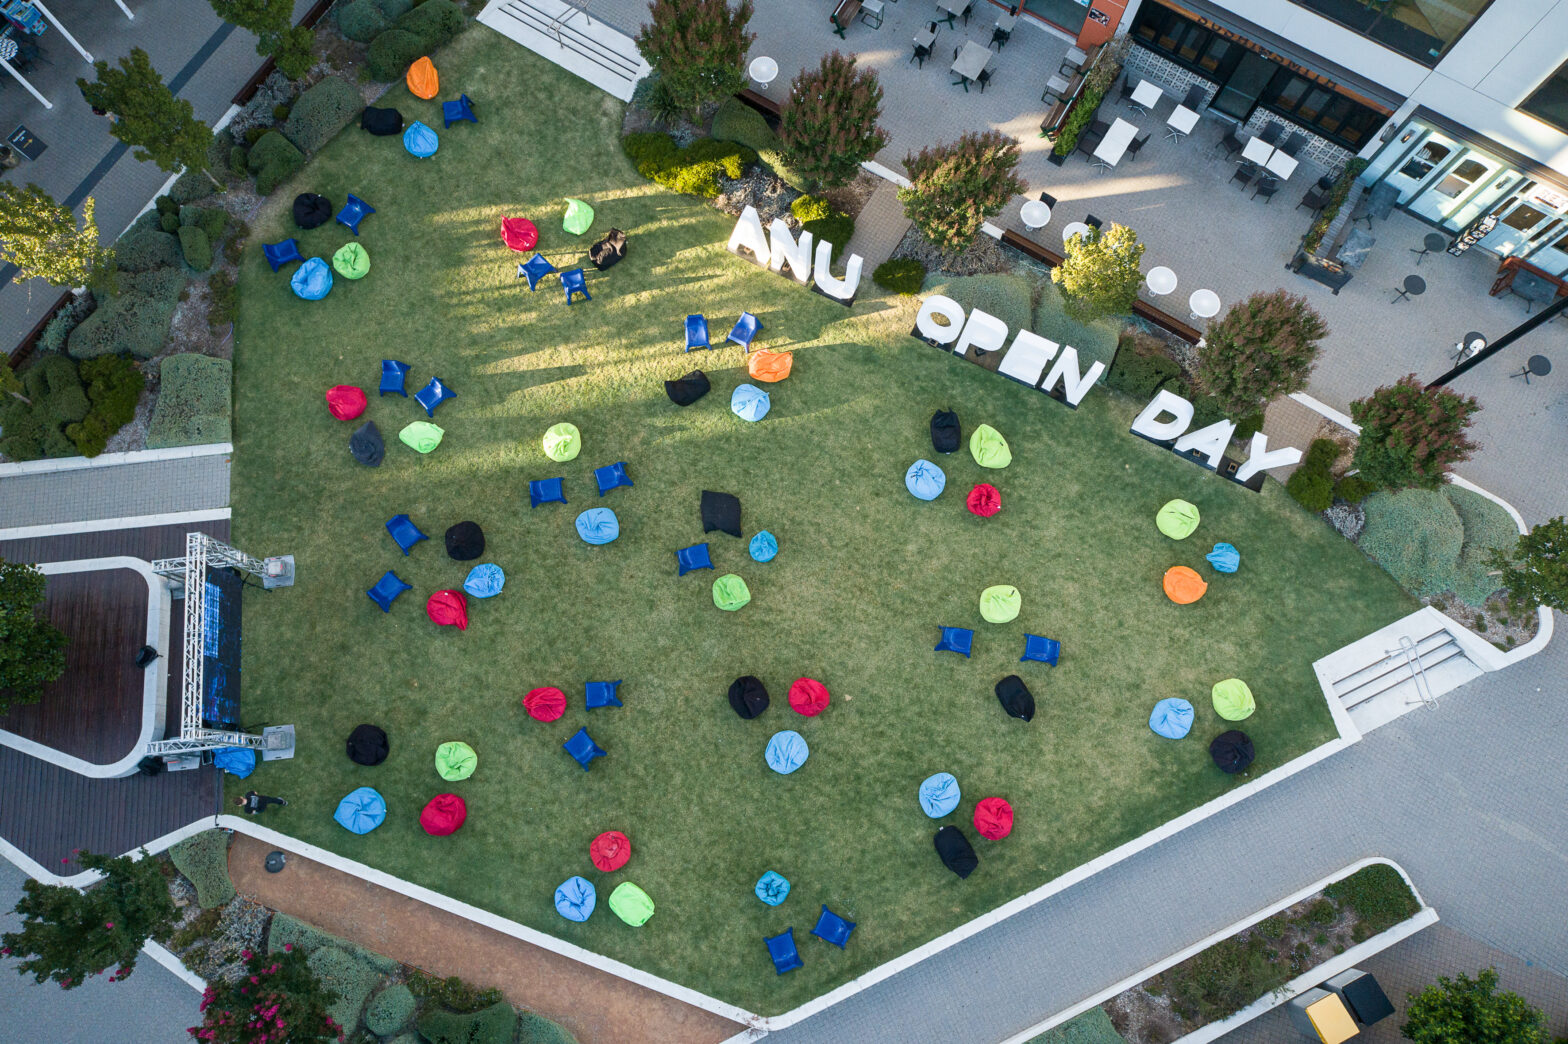 Closer drone shot at ANU Open Day